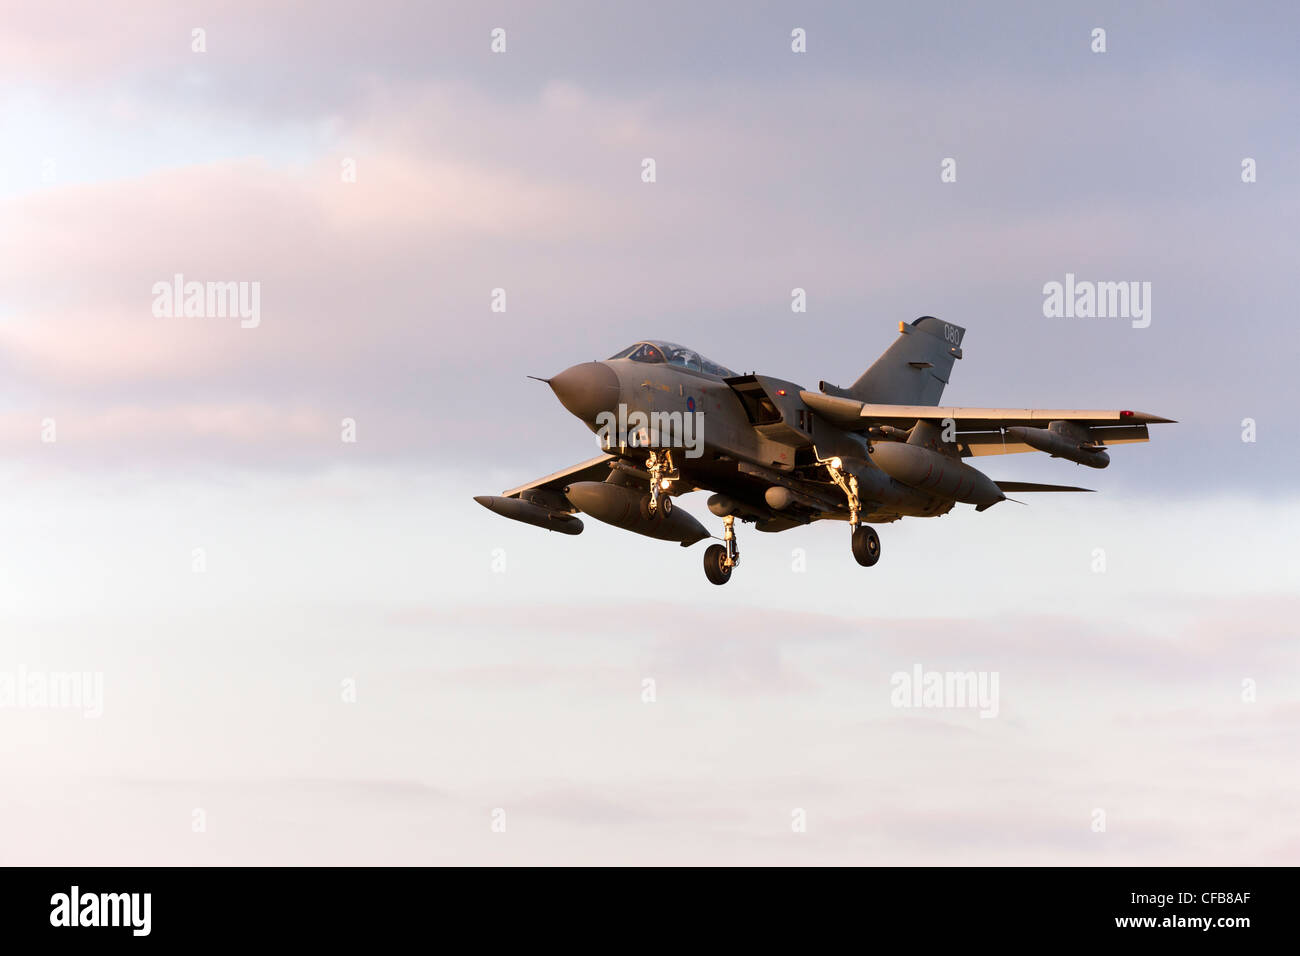 Panavia Tornado GR4 on final approach to land at RAF Lossiemouth, Scotland Stock Photo